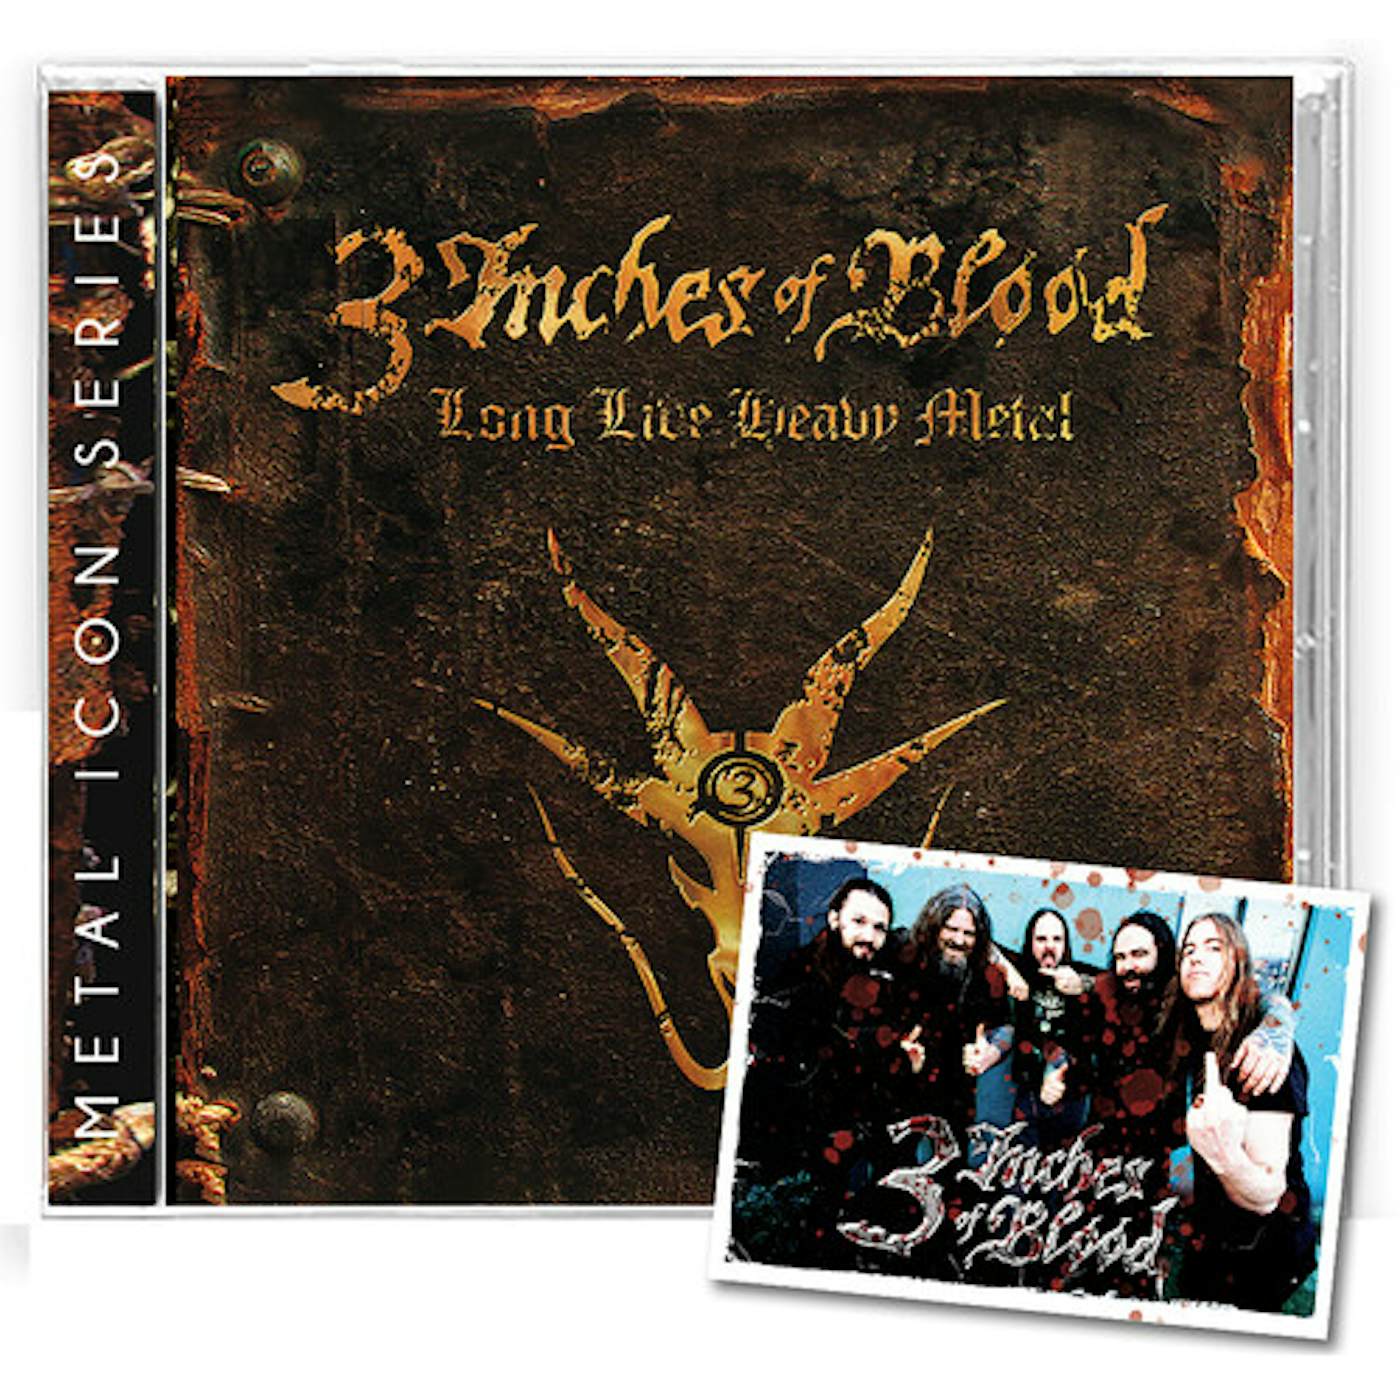 3 Inches Of Blood LONG LIVE HEAVY METAL CD